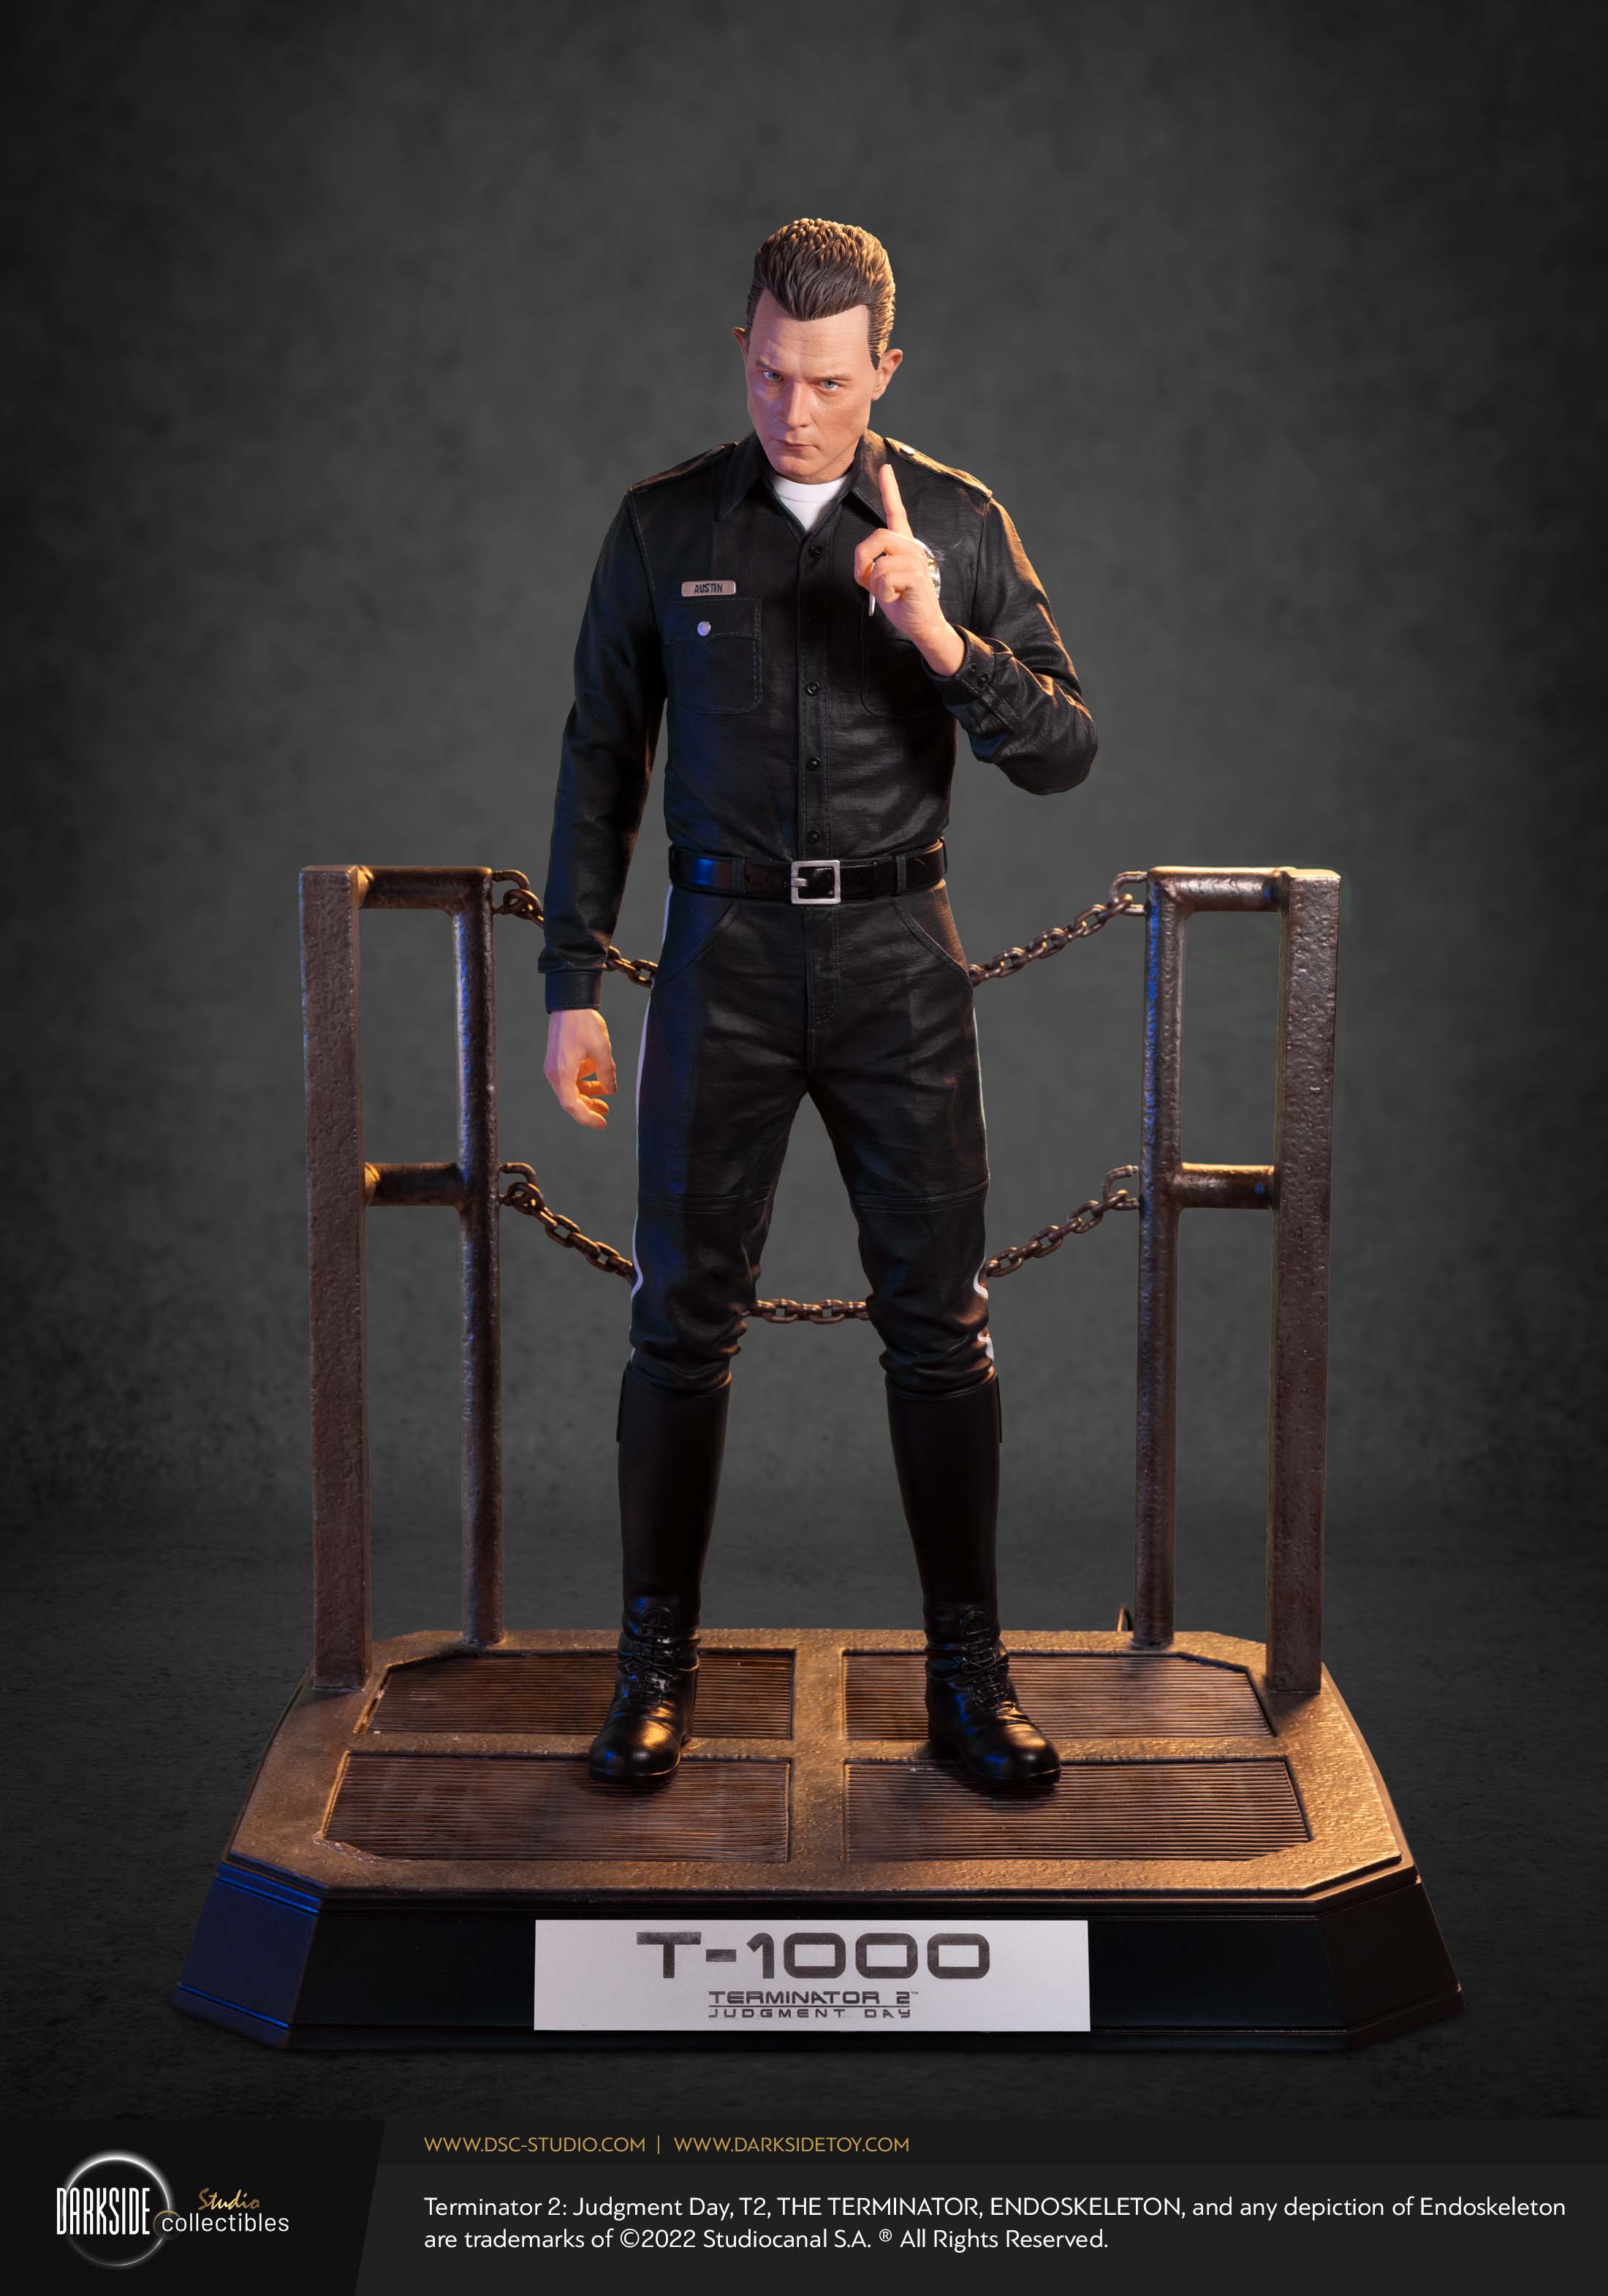 T-1000 Terminator 2: Judgment Day 30th Anniversary 1/3 Scale Premium Statue by Darkside Collectibles Studio_product